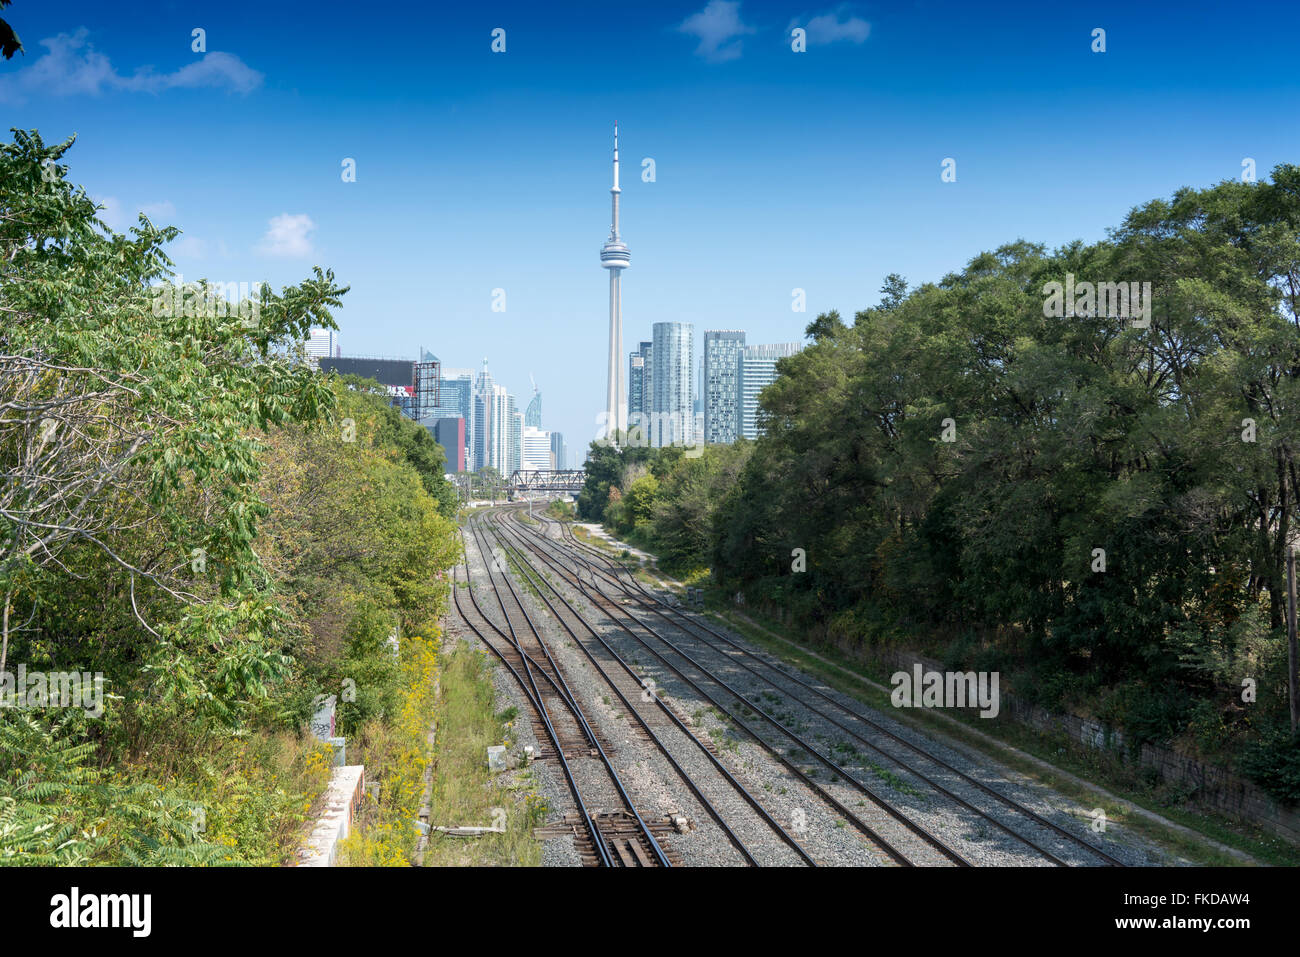 View of CN Tower from railroad tracks, Toronto, Canada Stock Photo